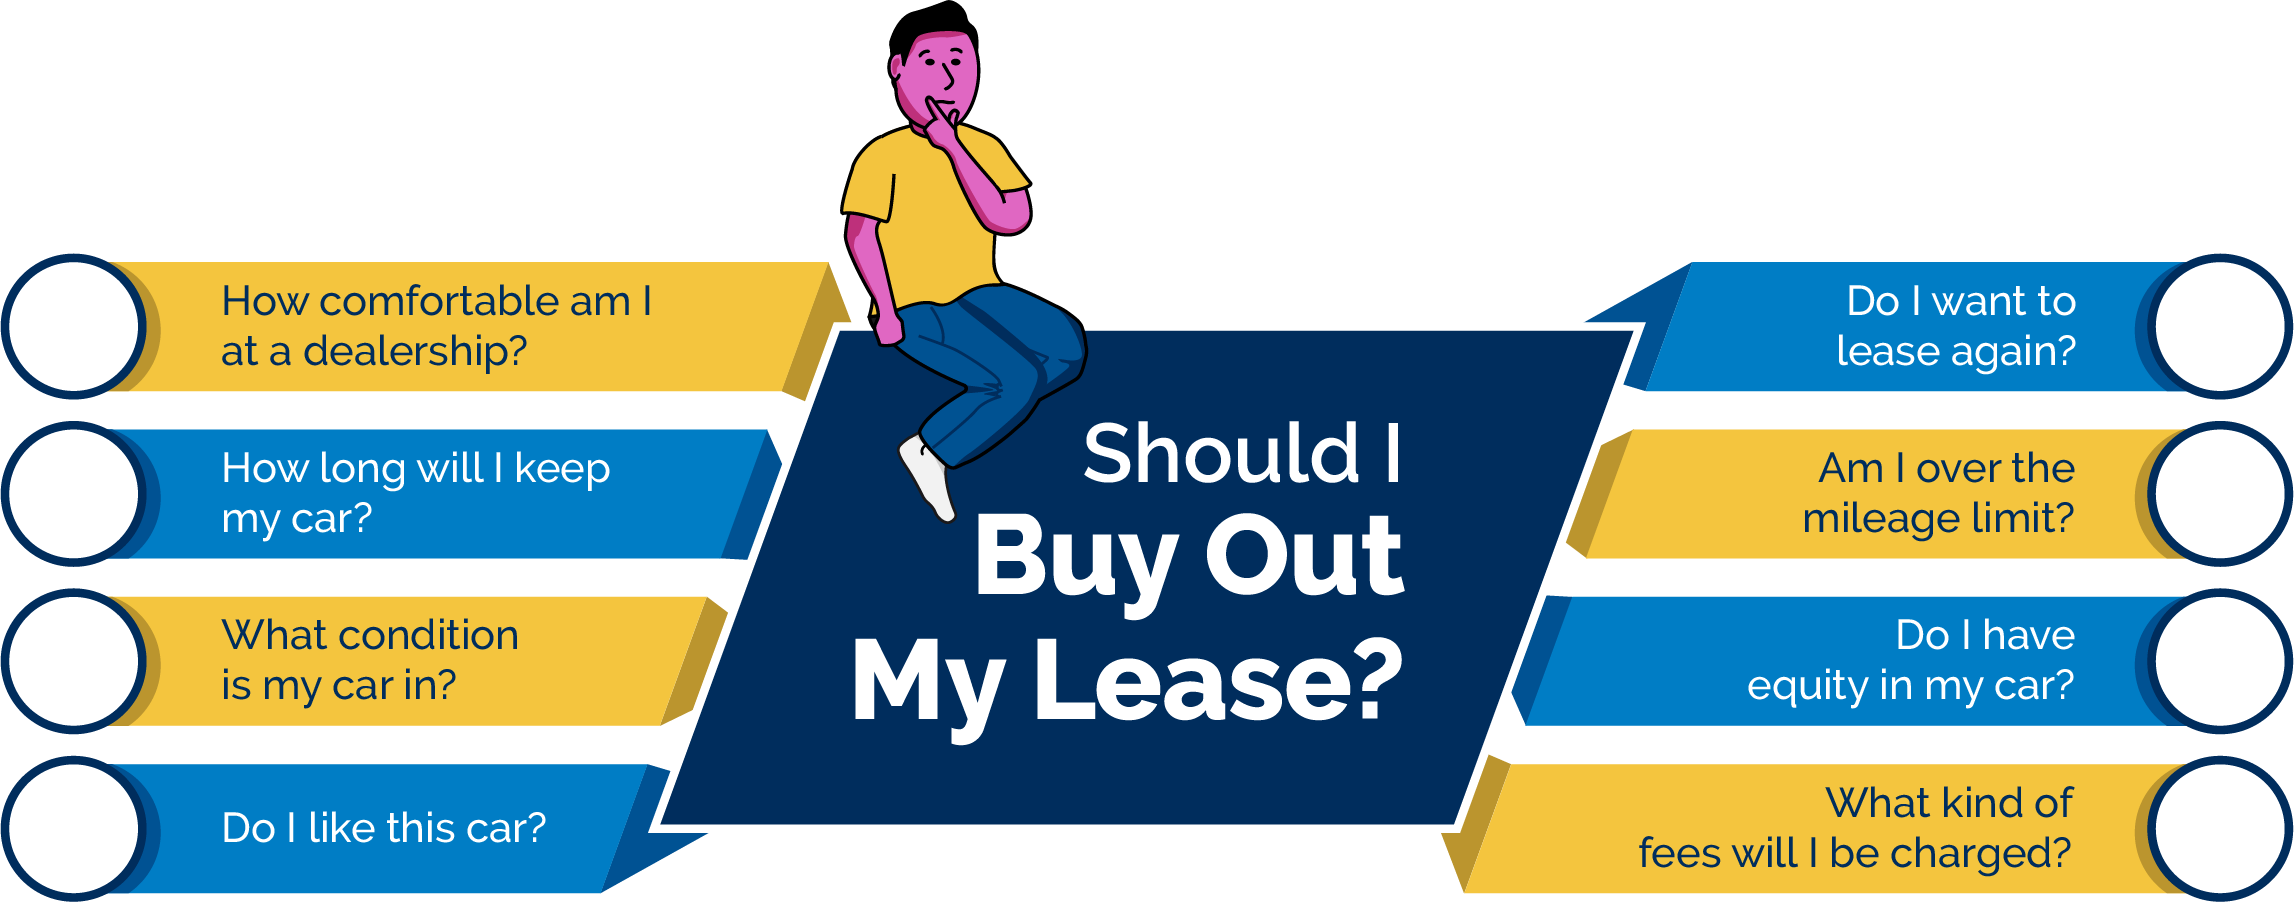 Picture of a cartoon man “sitting” on top of the question, “Should I Buy Out My Lease?” The questions are: How comfortable am I at a dealership?; How long will I keep my car?; What condition is my car in?; Do I like this car?; Do I want to lease again?; Am I over the mileage limit?; Do I have equity in my car?; What kind of fees will I be charged?